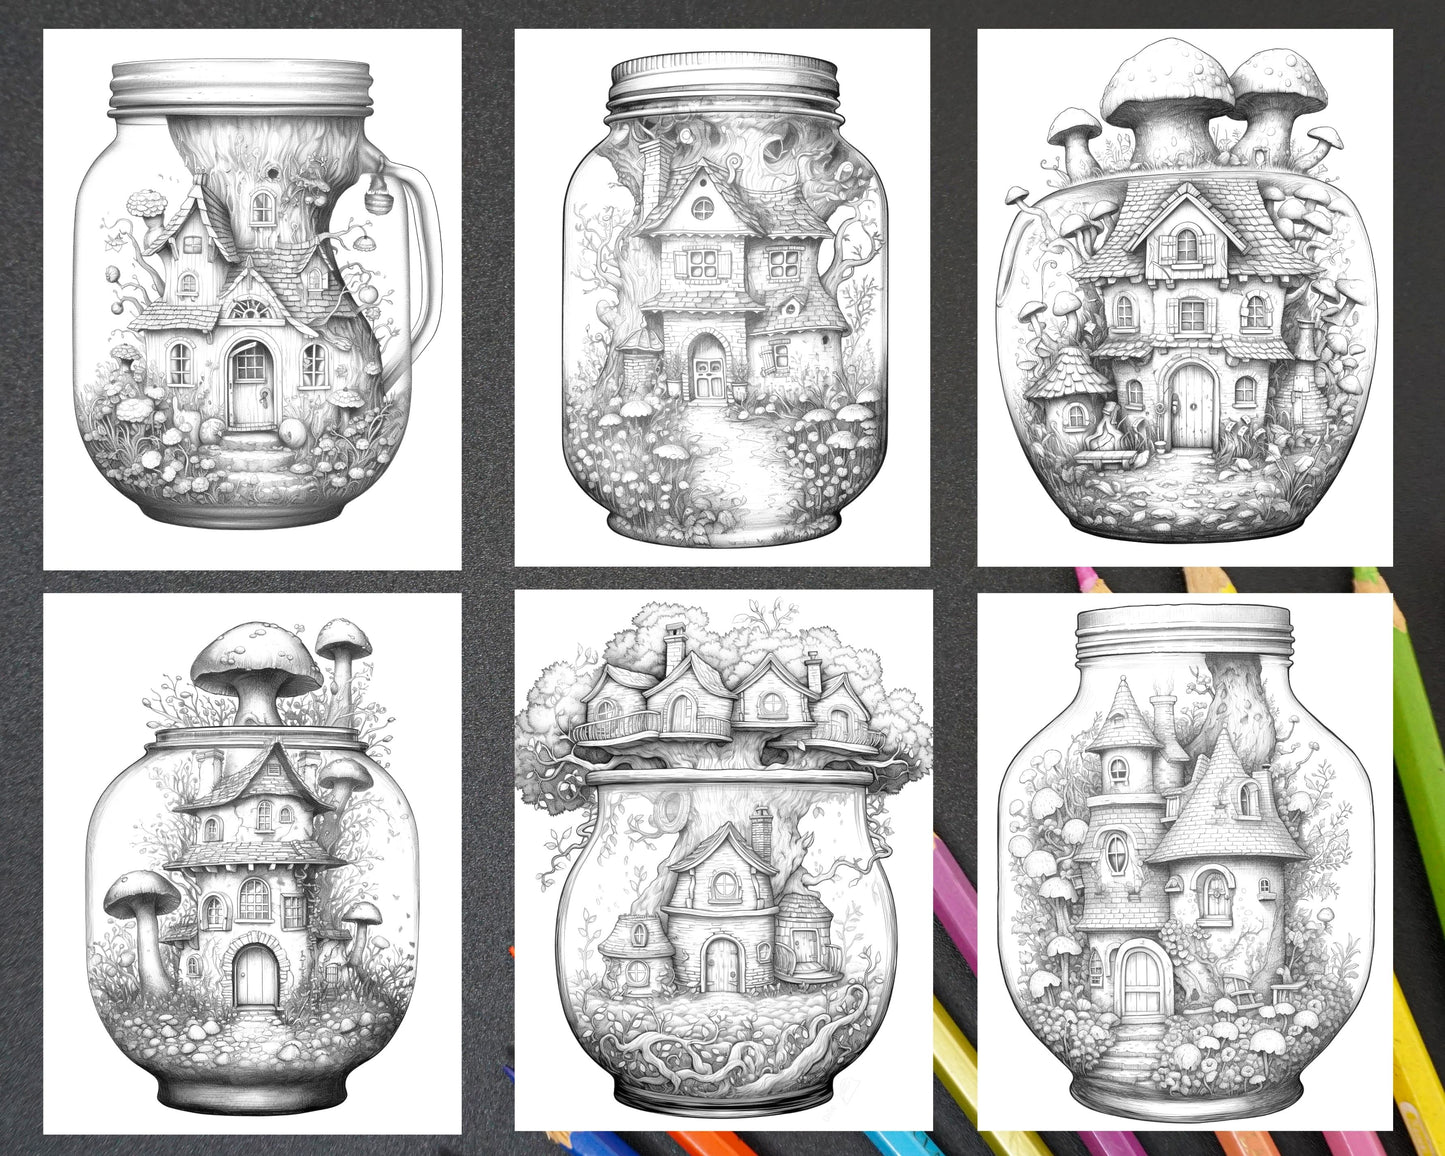 Fairy House in Jar Grayscale Coloring Pages Printable, Adult Coloring Activity, Black and White Coloring Sheets, Intricate Line Art, Fairy Garden Illustrations